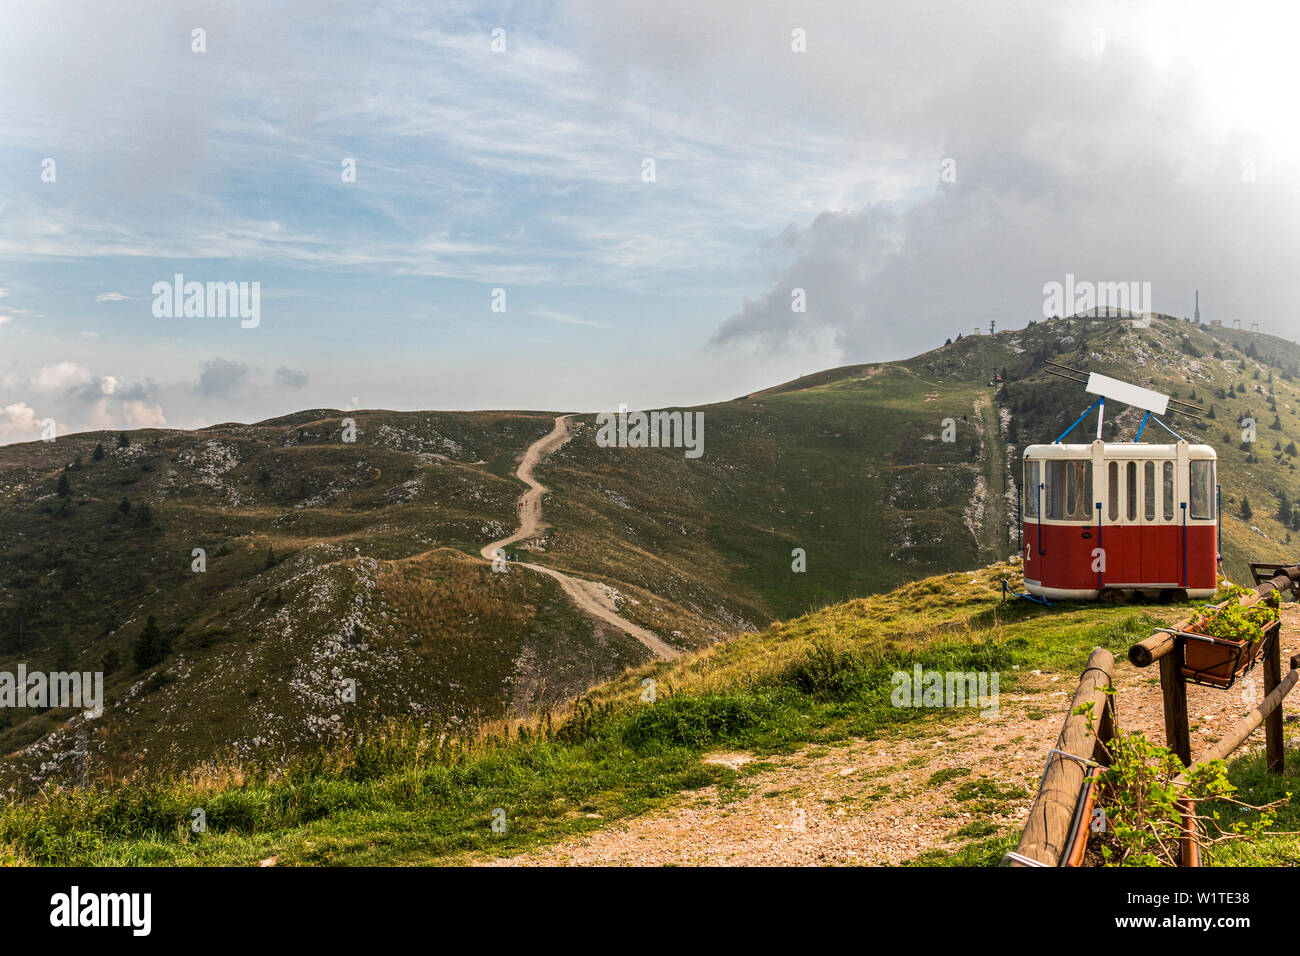 Old cable way lift gondola cab abandoned in peak panorama of Monte Baldo mountain near Malcesine in Italy Stock Photo